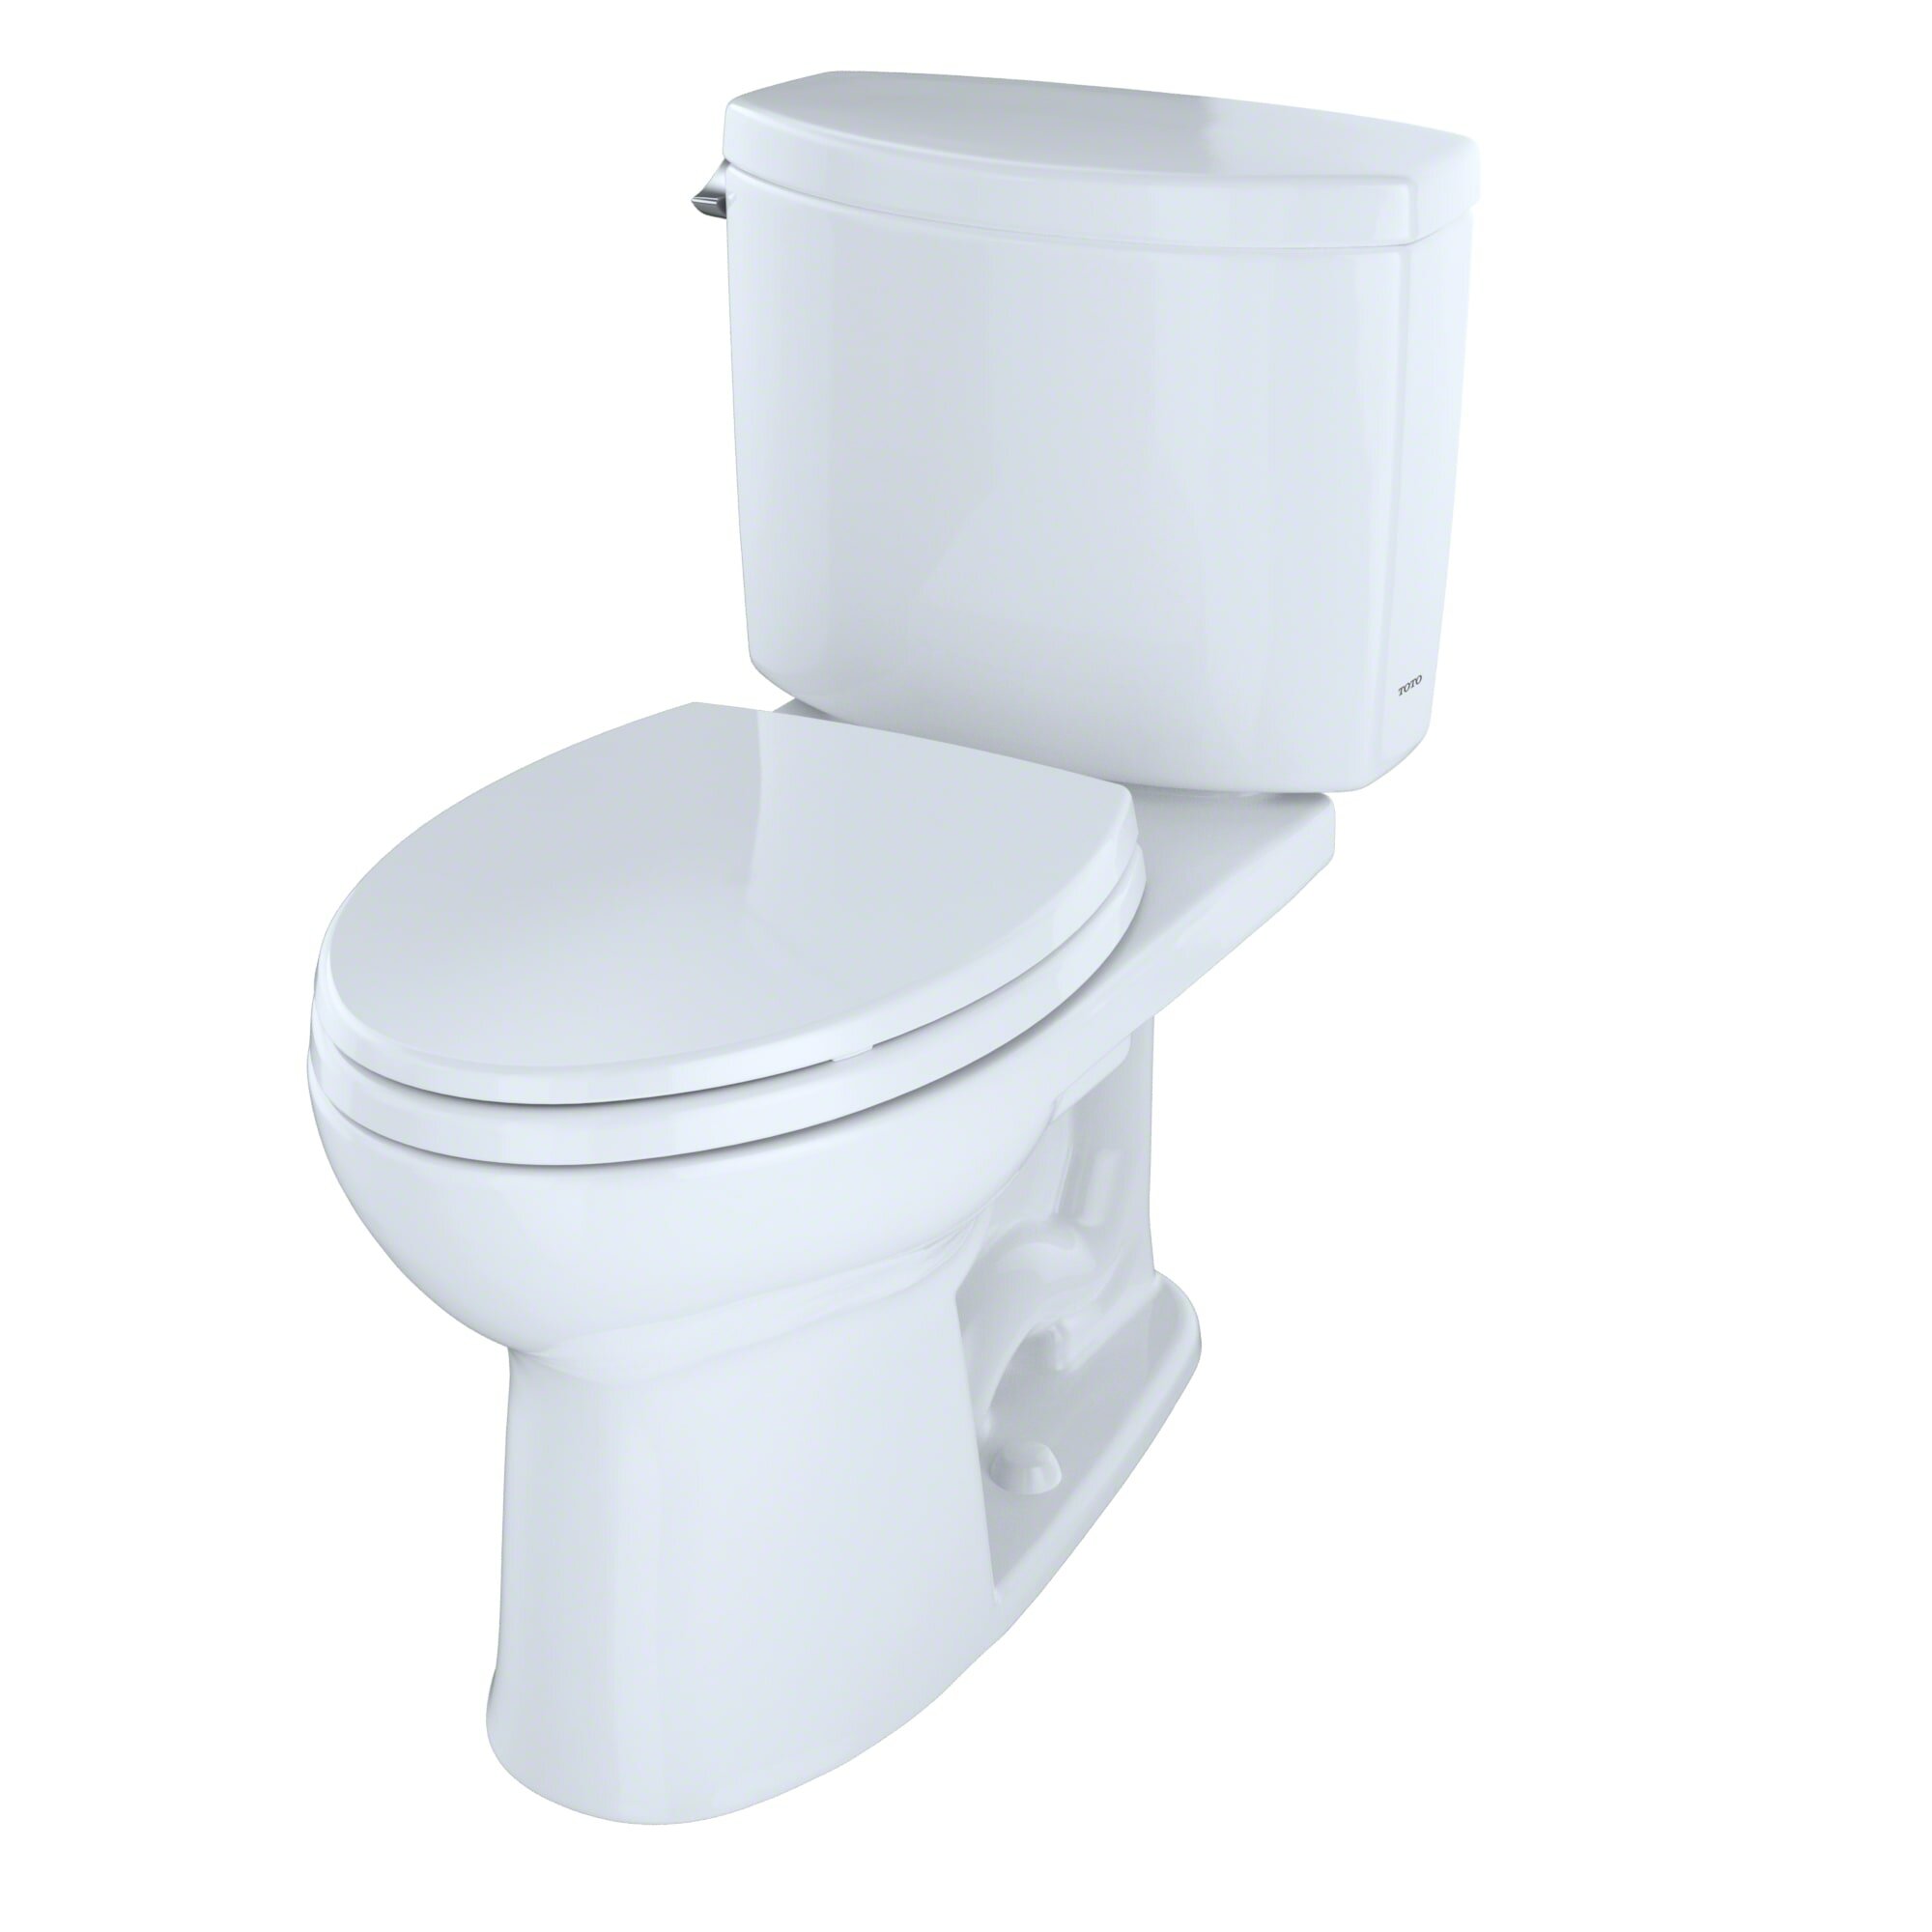 Toto Drake 1 28 Gpf Water Efficient Elongated Two Piece Toilet With Cefiontect Seat Not Included Reviews Wayfair